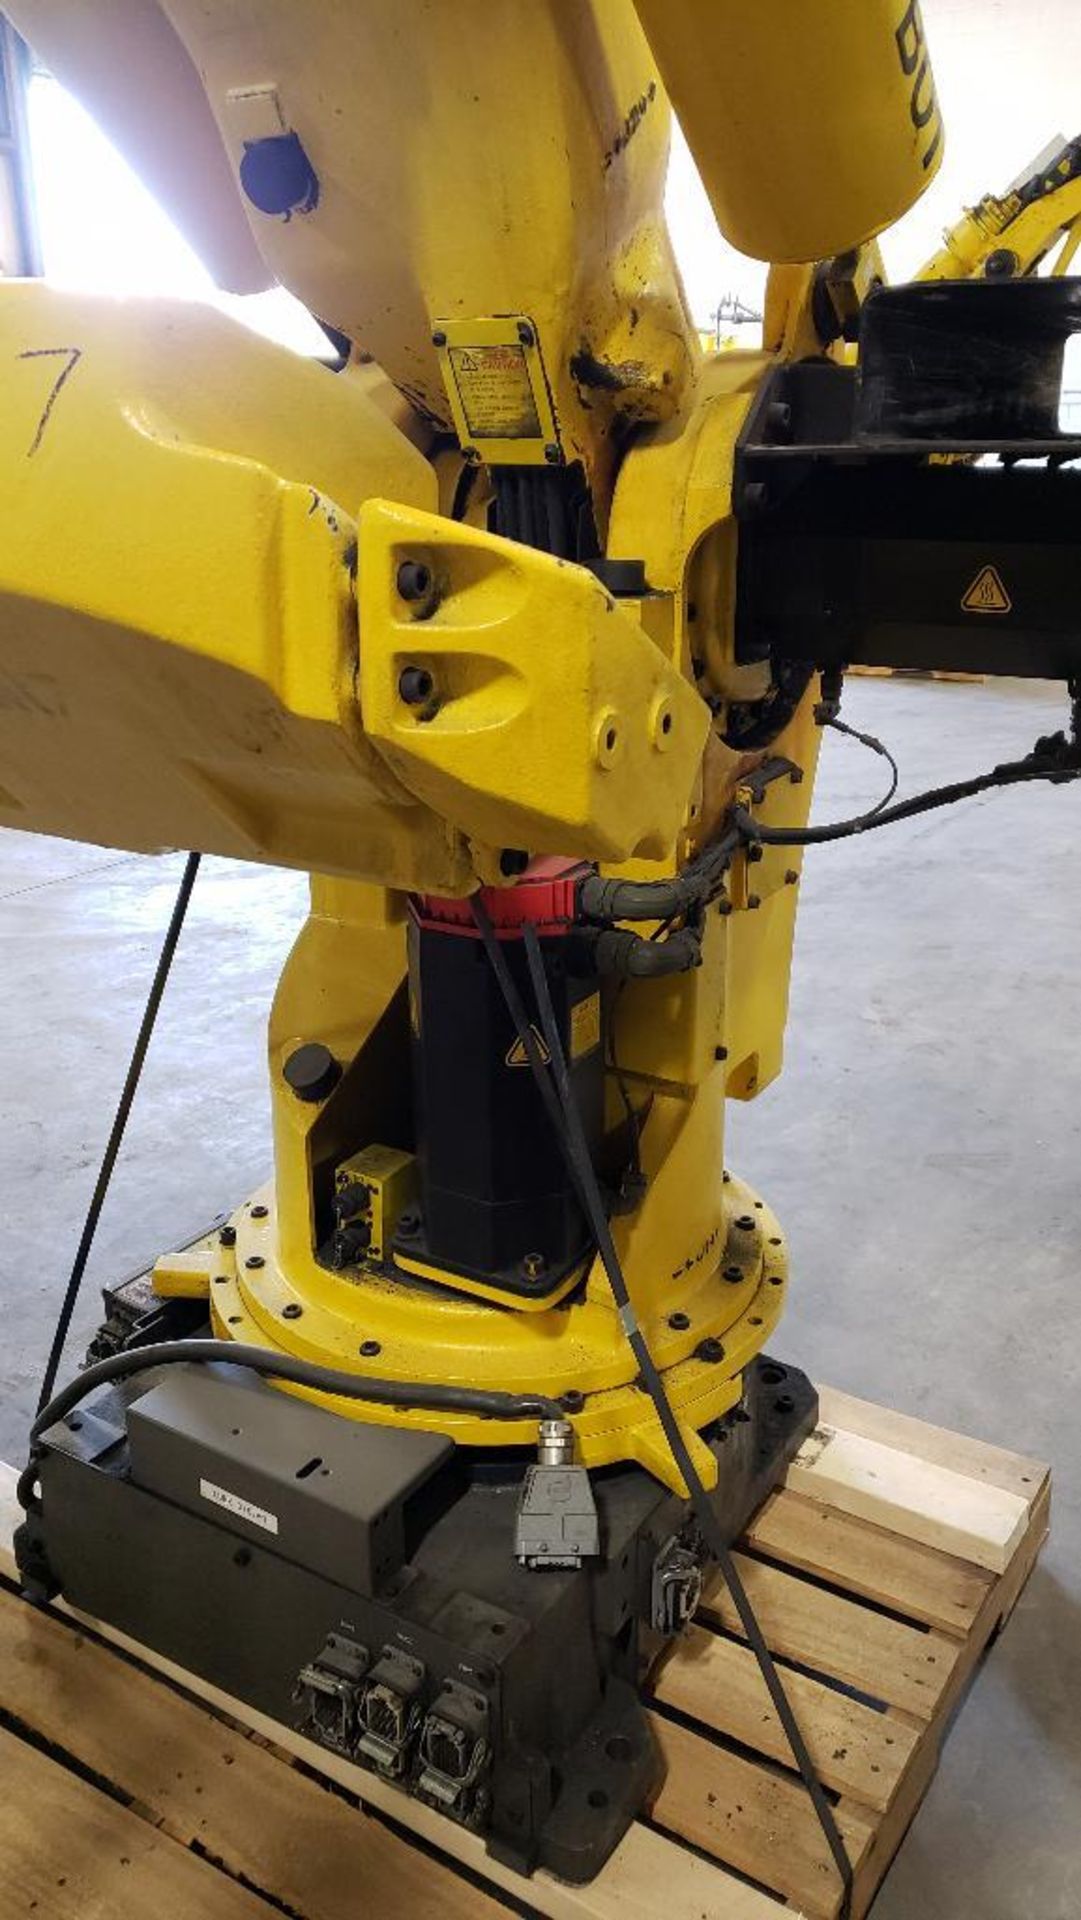 Fanuc S-420iW robot 6-axis arm. - Image 7 of 7